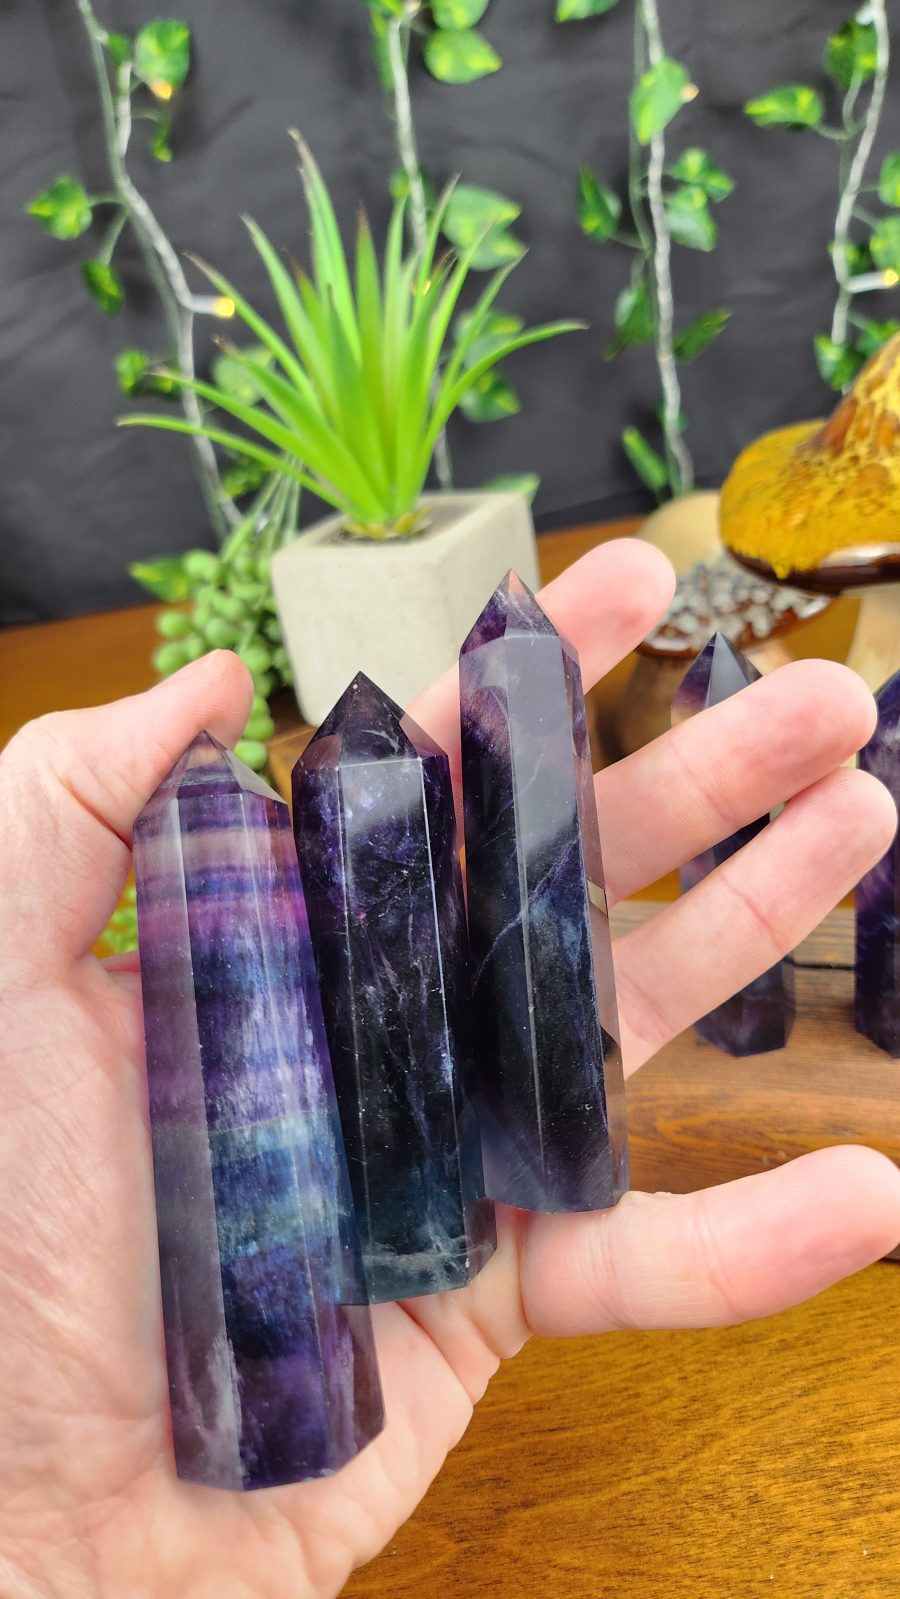 Rainbow Fluorite crystal towers shown in hand for scale.